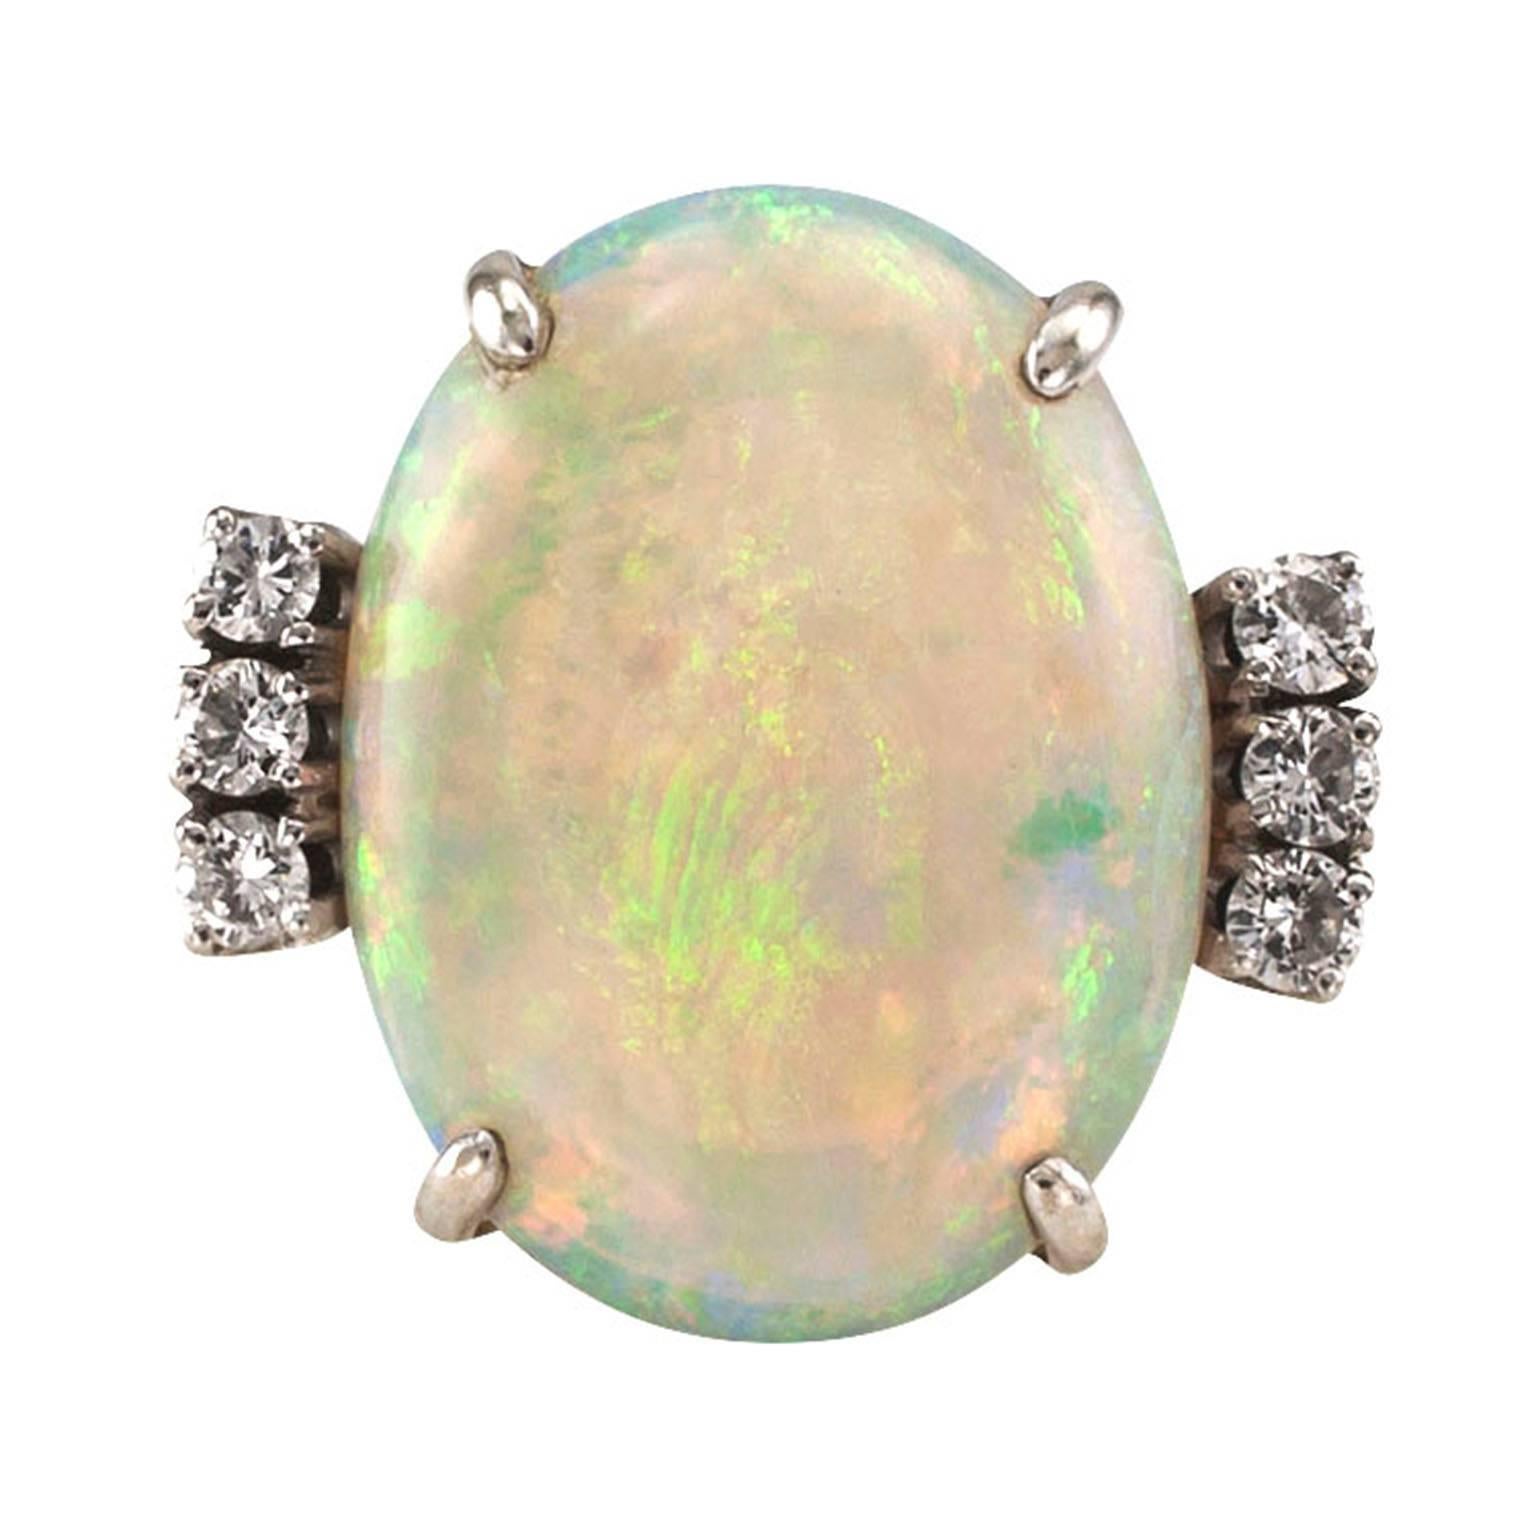  Opal and Diamond White Gold Ring

Characteristic of nice opals, softly shimmering from its 18 karat white gold mount, this one exhibits subtle shades of red, green, orange, pale blue and many other colors in between.  Flanked by six round